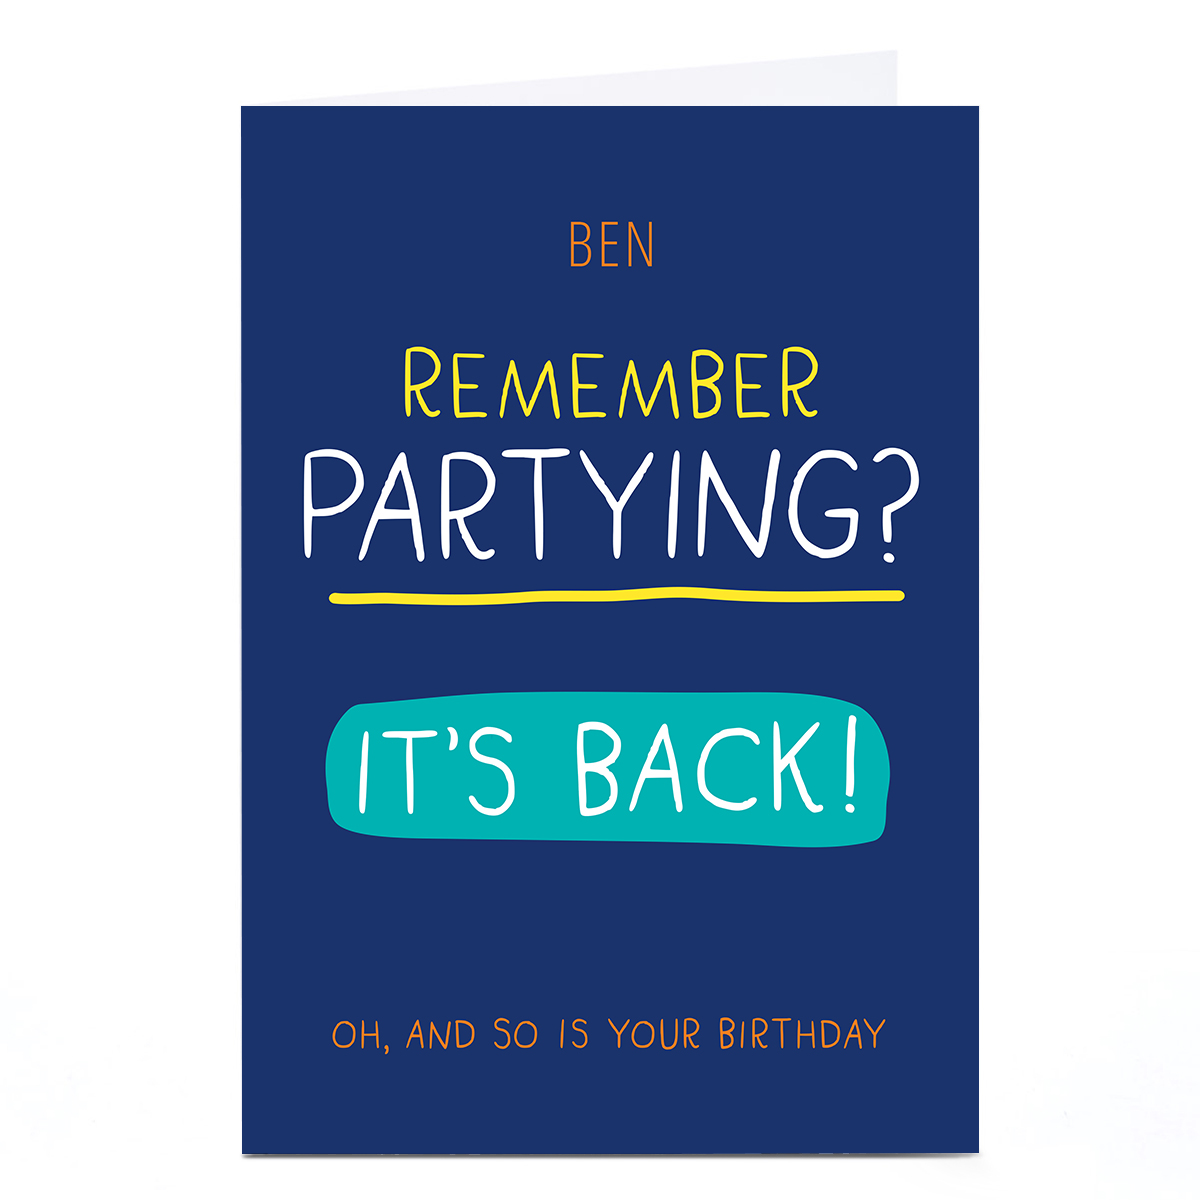 Personalised Smiley Happy People Birthday Card - Remember Partying?